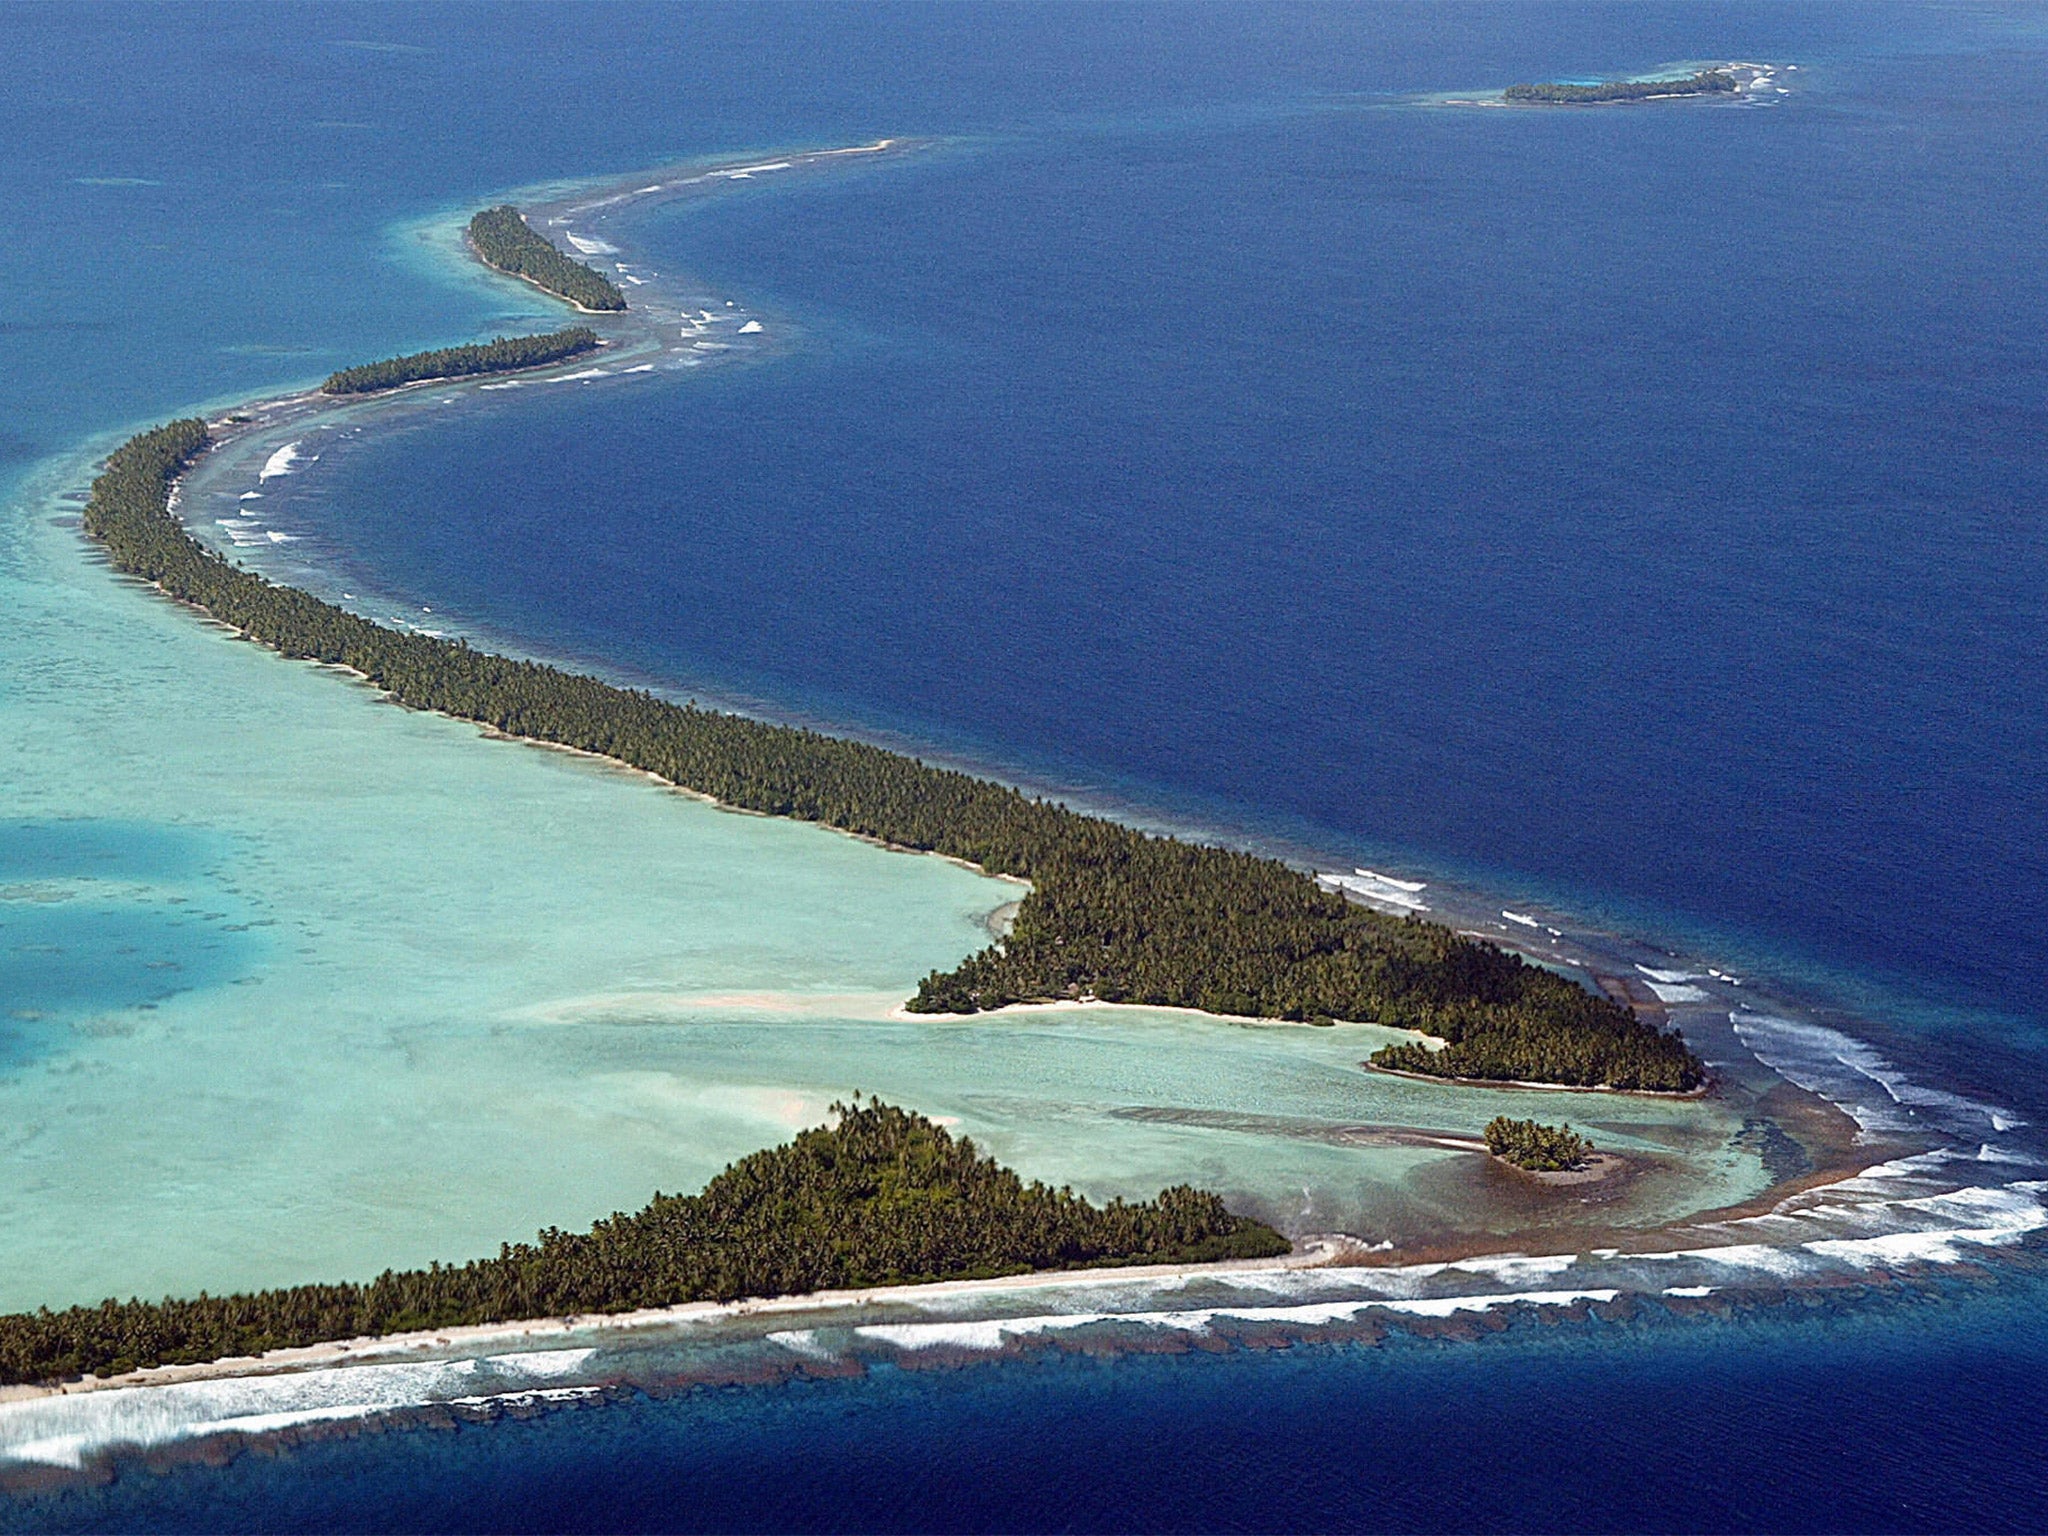 Funafuti atoll, Tuvalu’s most populated; the country’s population has declined by 15 per cent